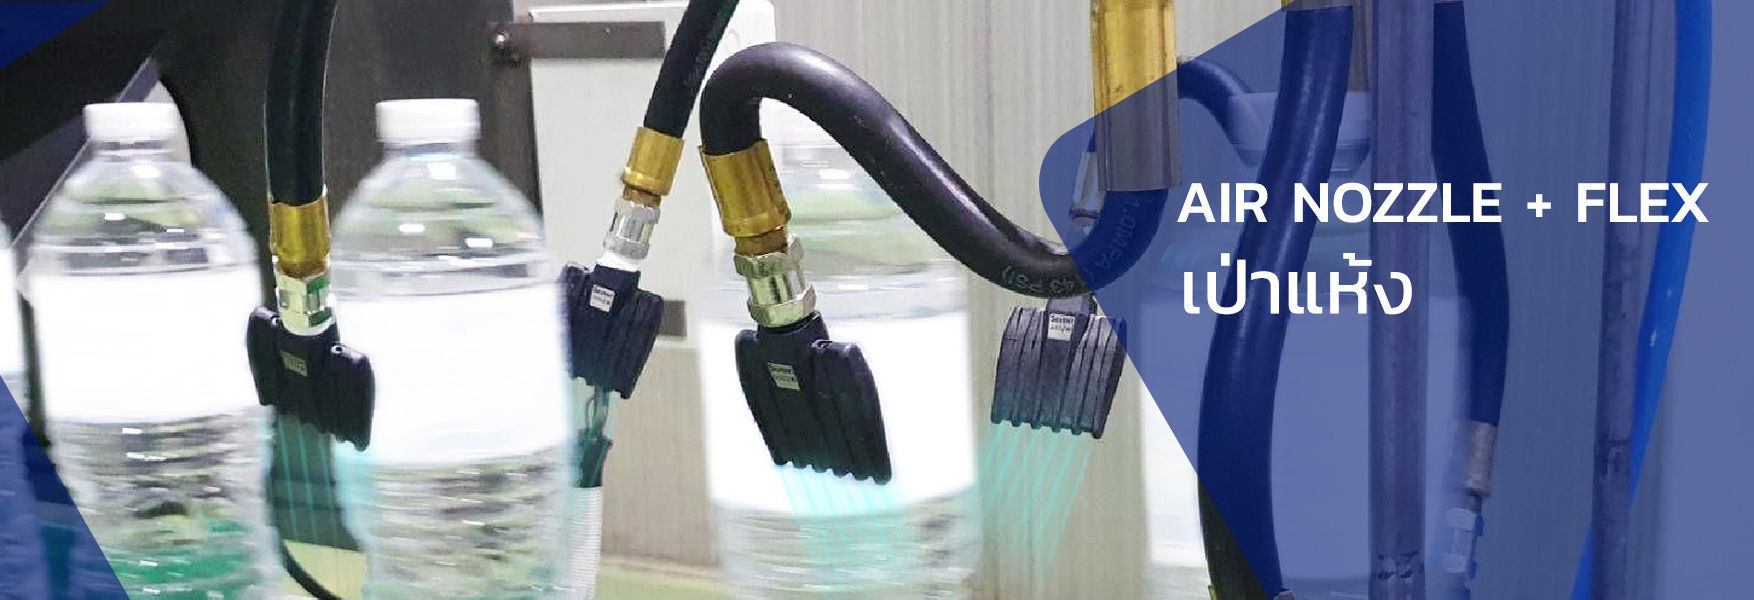 flat air nozzle with flexible hose